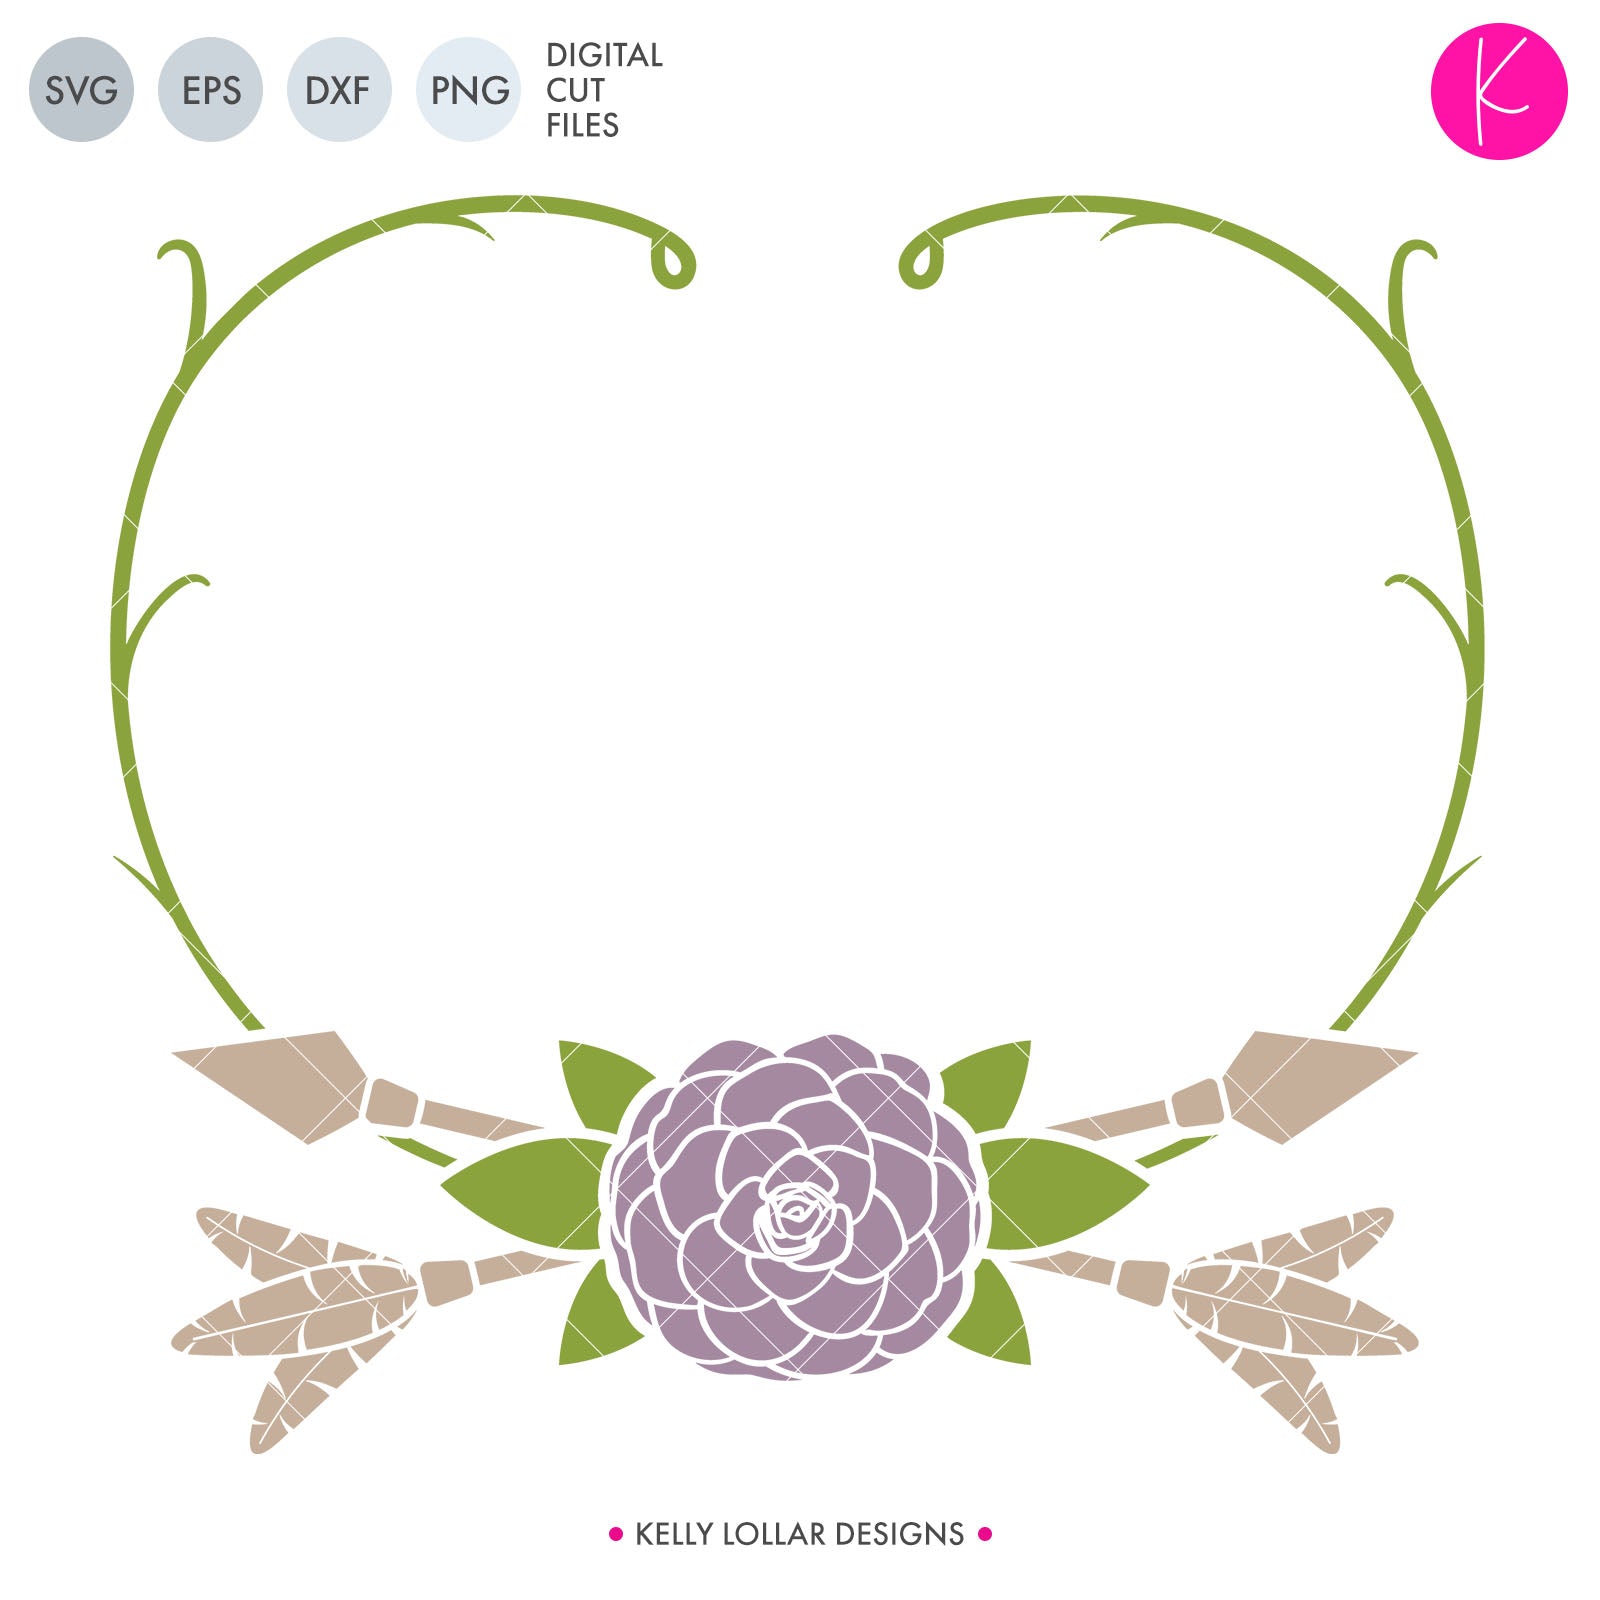 Monogram Svg Dxf Eps Png Cut Files Kelly Lollar Designs Tagged Flower